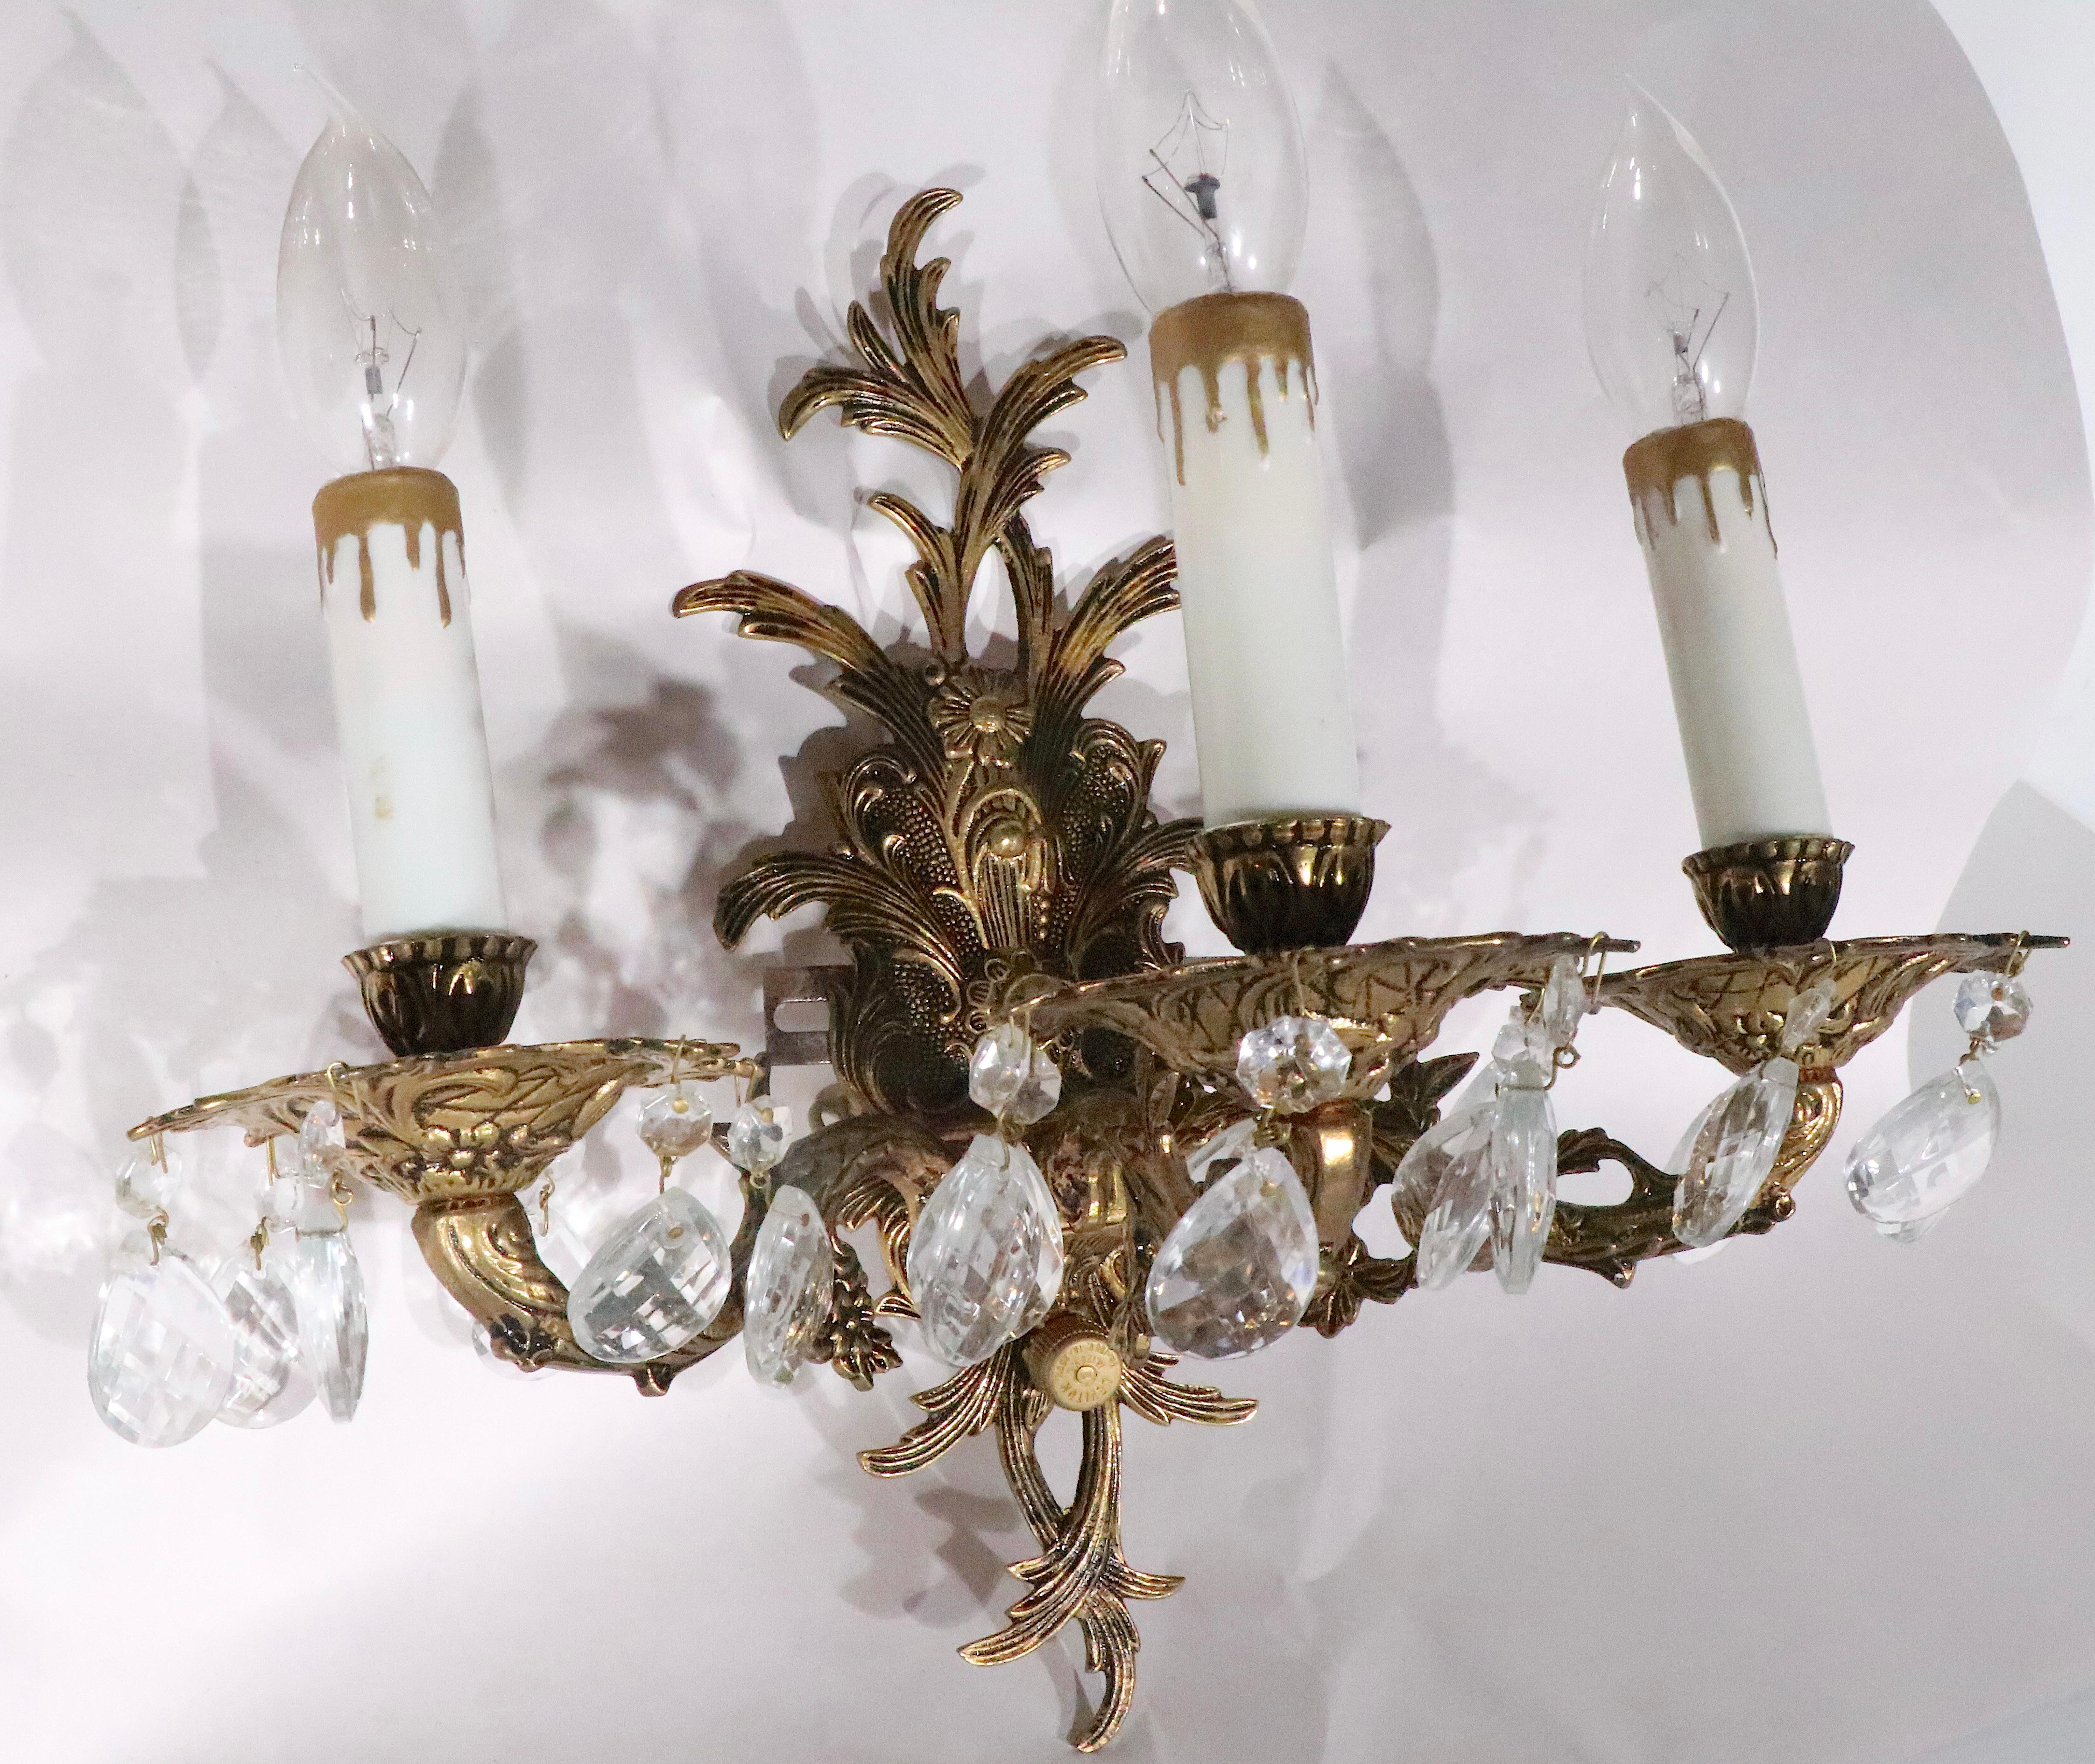 Pair of Rococo Revival cast brass sconces, each having three arms, each arm having a candle sleeve socket. Made in Spain, circa 1950- 1970's. Both sconces are in excellent, clean, original, working condition, offered and priced as a pair.  